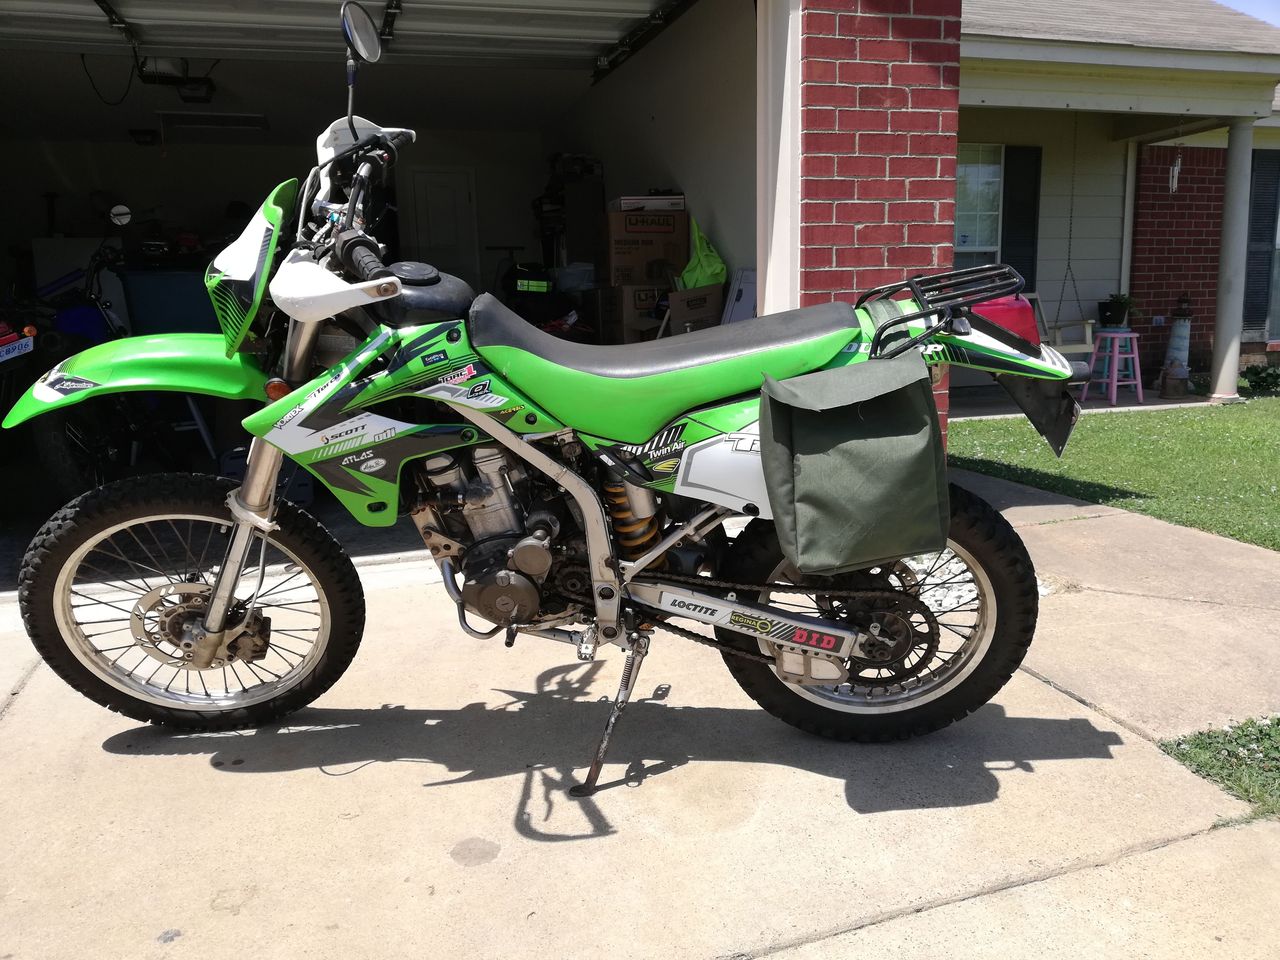 My klx. needs some love after sitting